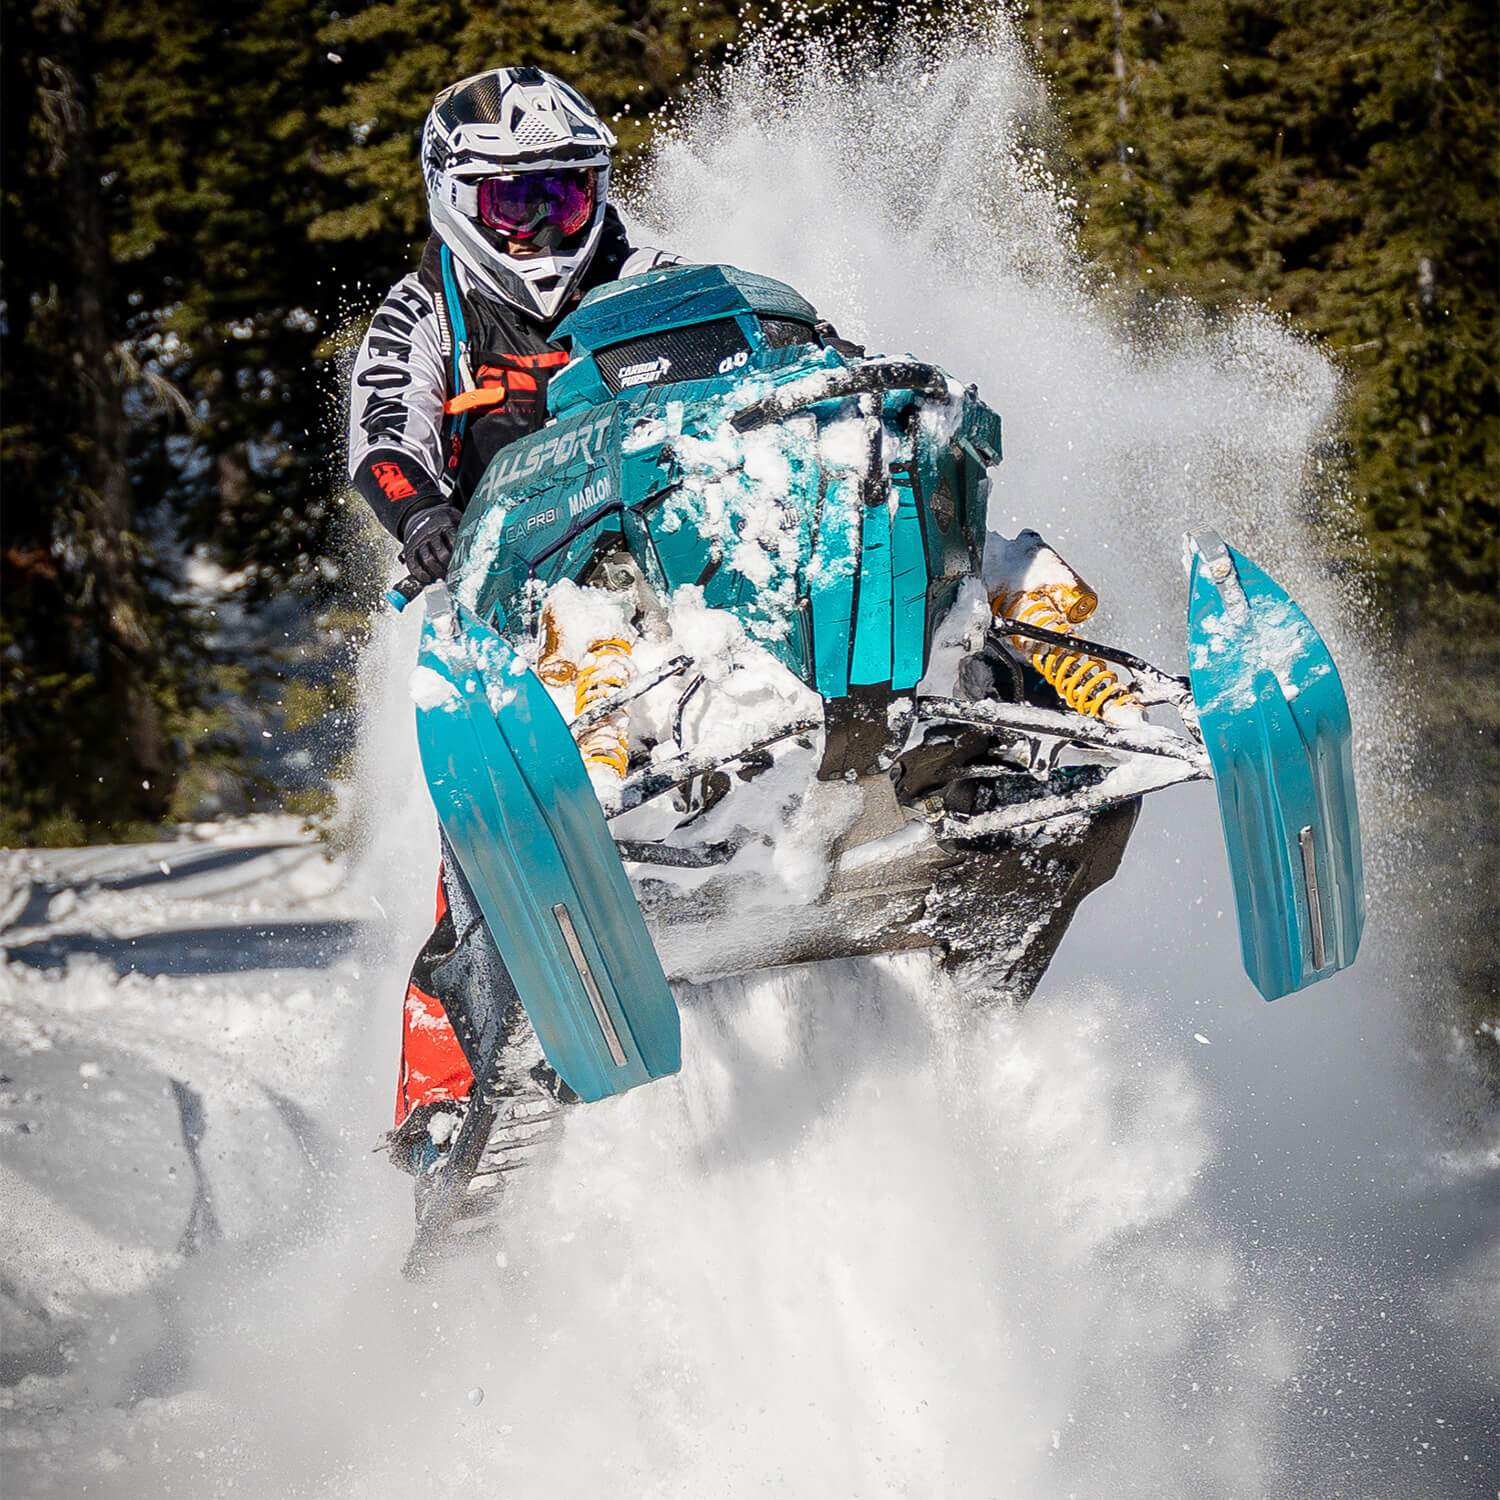 Professional backcountry snowmobile athlete Scott Eyer with new TMX mountain skis from C&A Pro